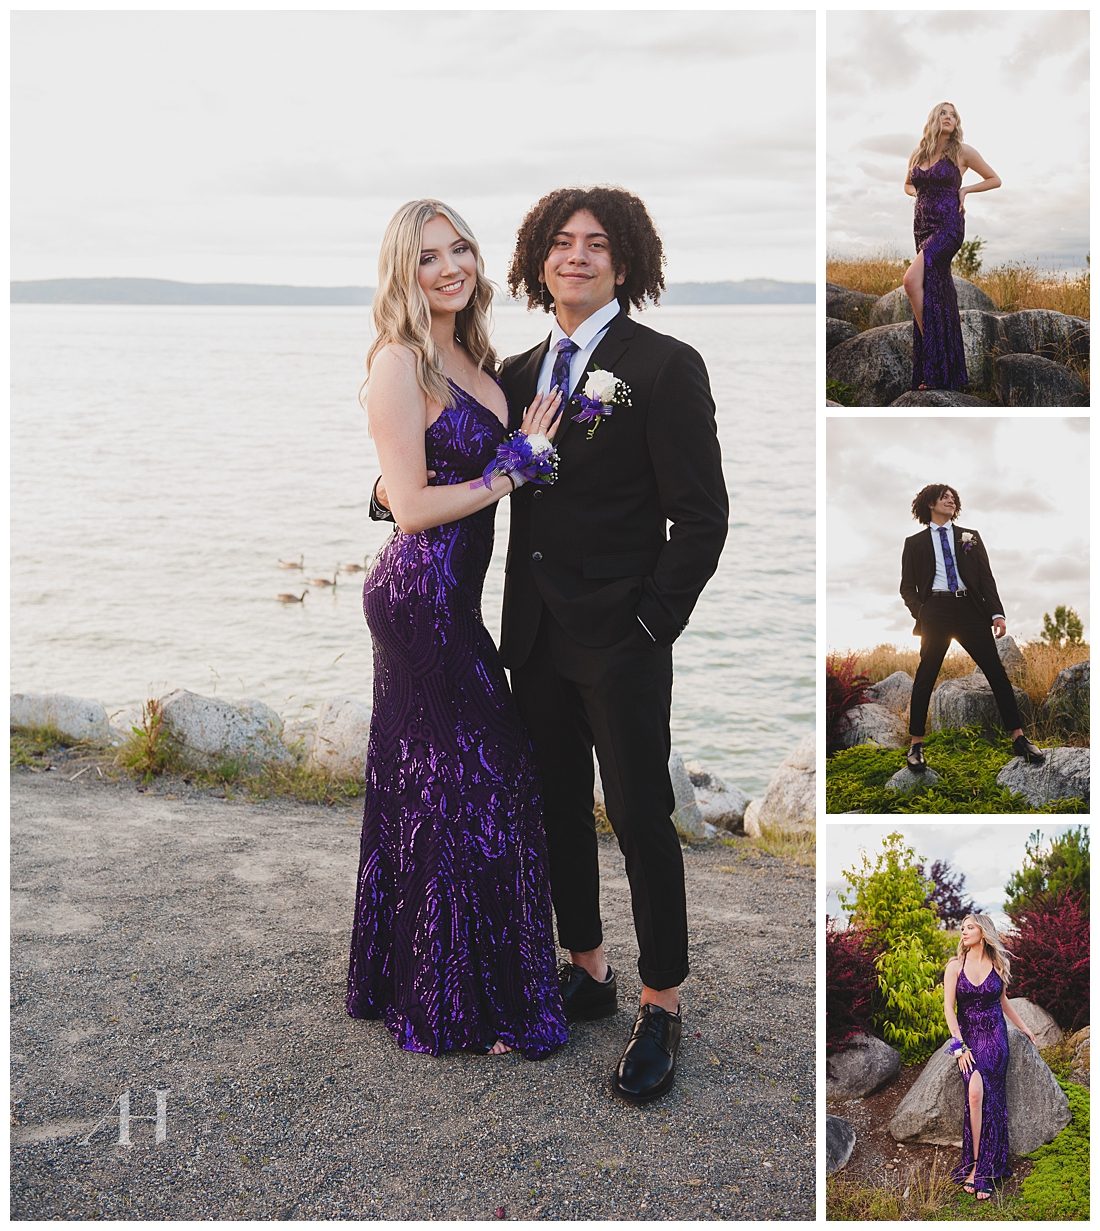 Senior Prom Couple in Purple Dress and Matching Suit | How to Coordinate Prom Outfits with Your Date, Prom Mini Sessions in Tacoma, 2021 Prom Ideas | Photographed by the Best Tacoma Senior Photographer Amanda Howse